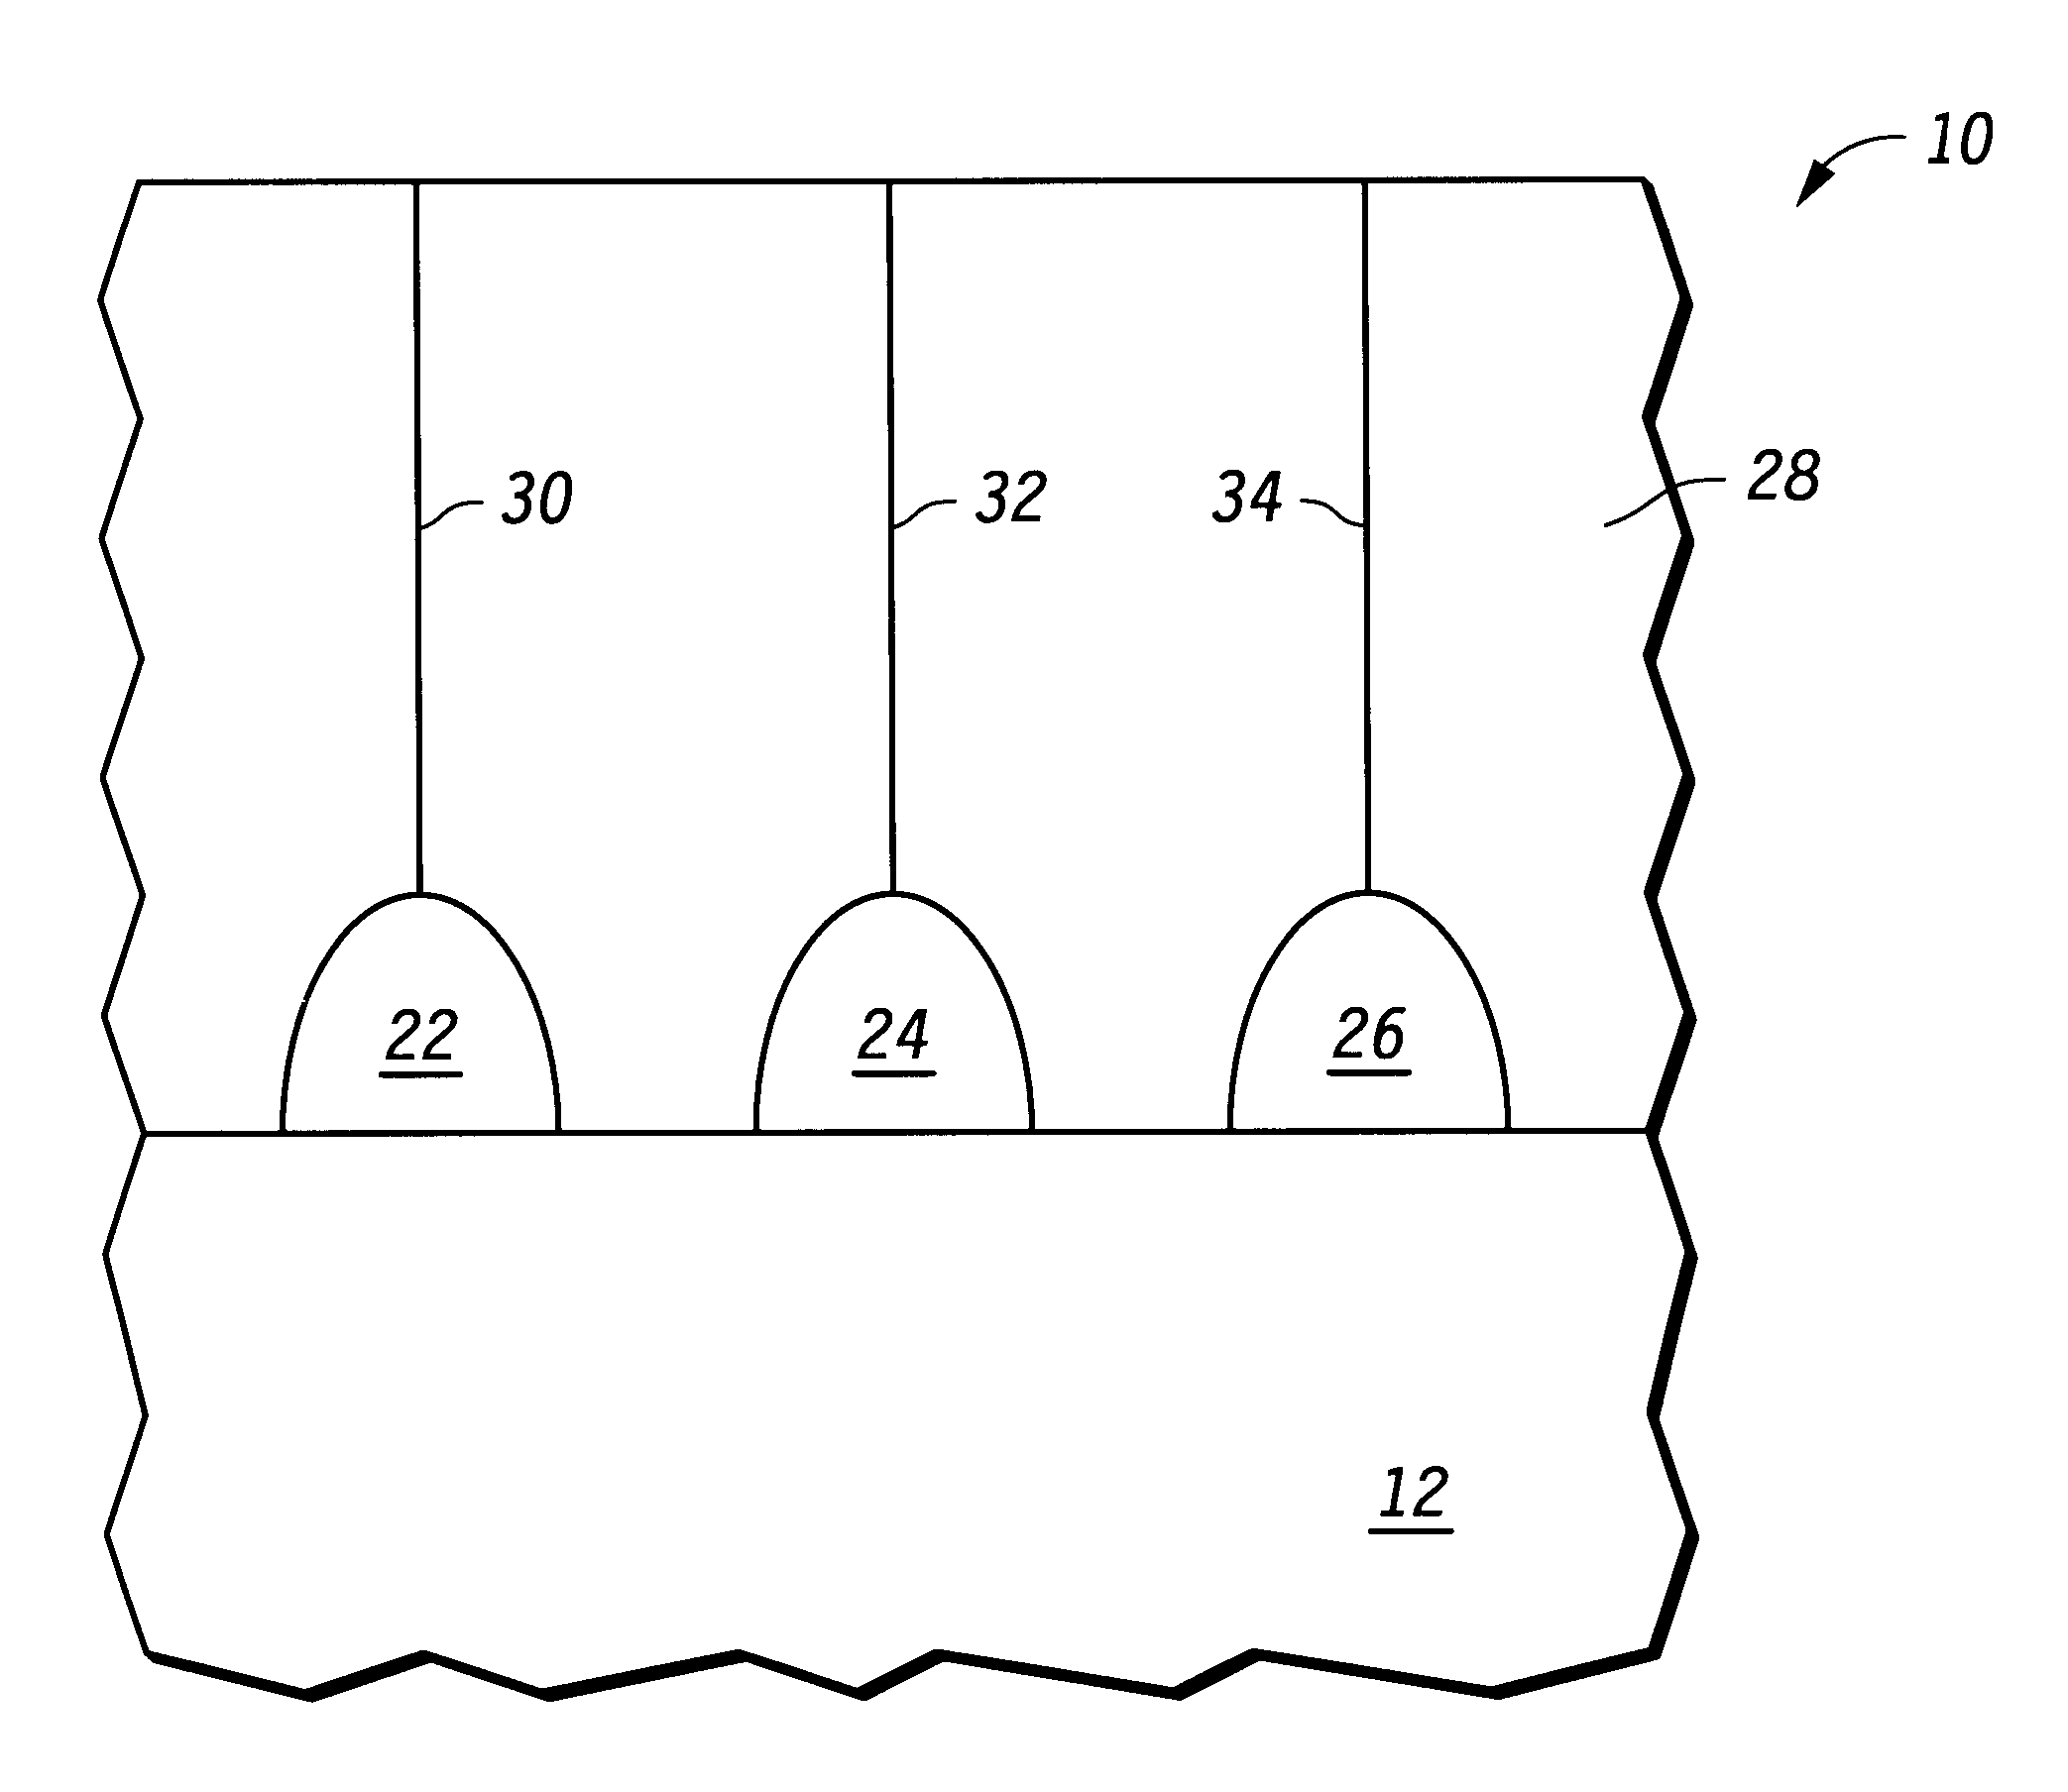 Semiconductor device and method therefor